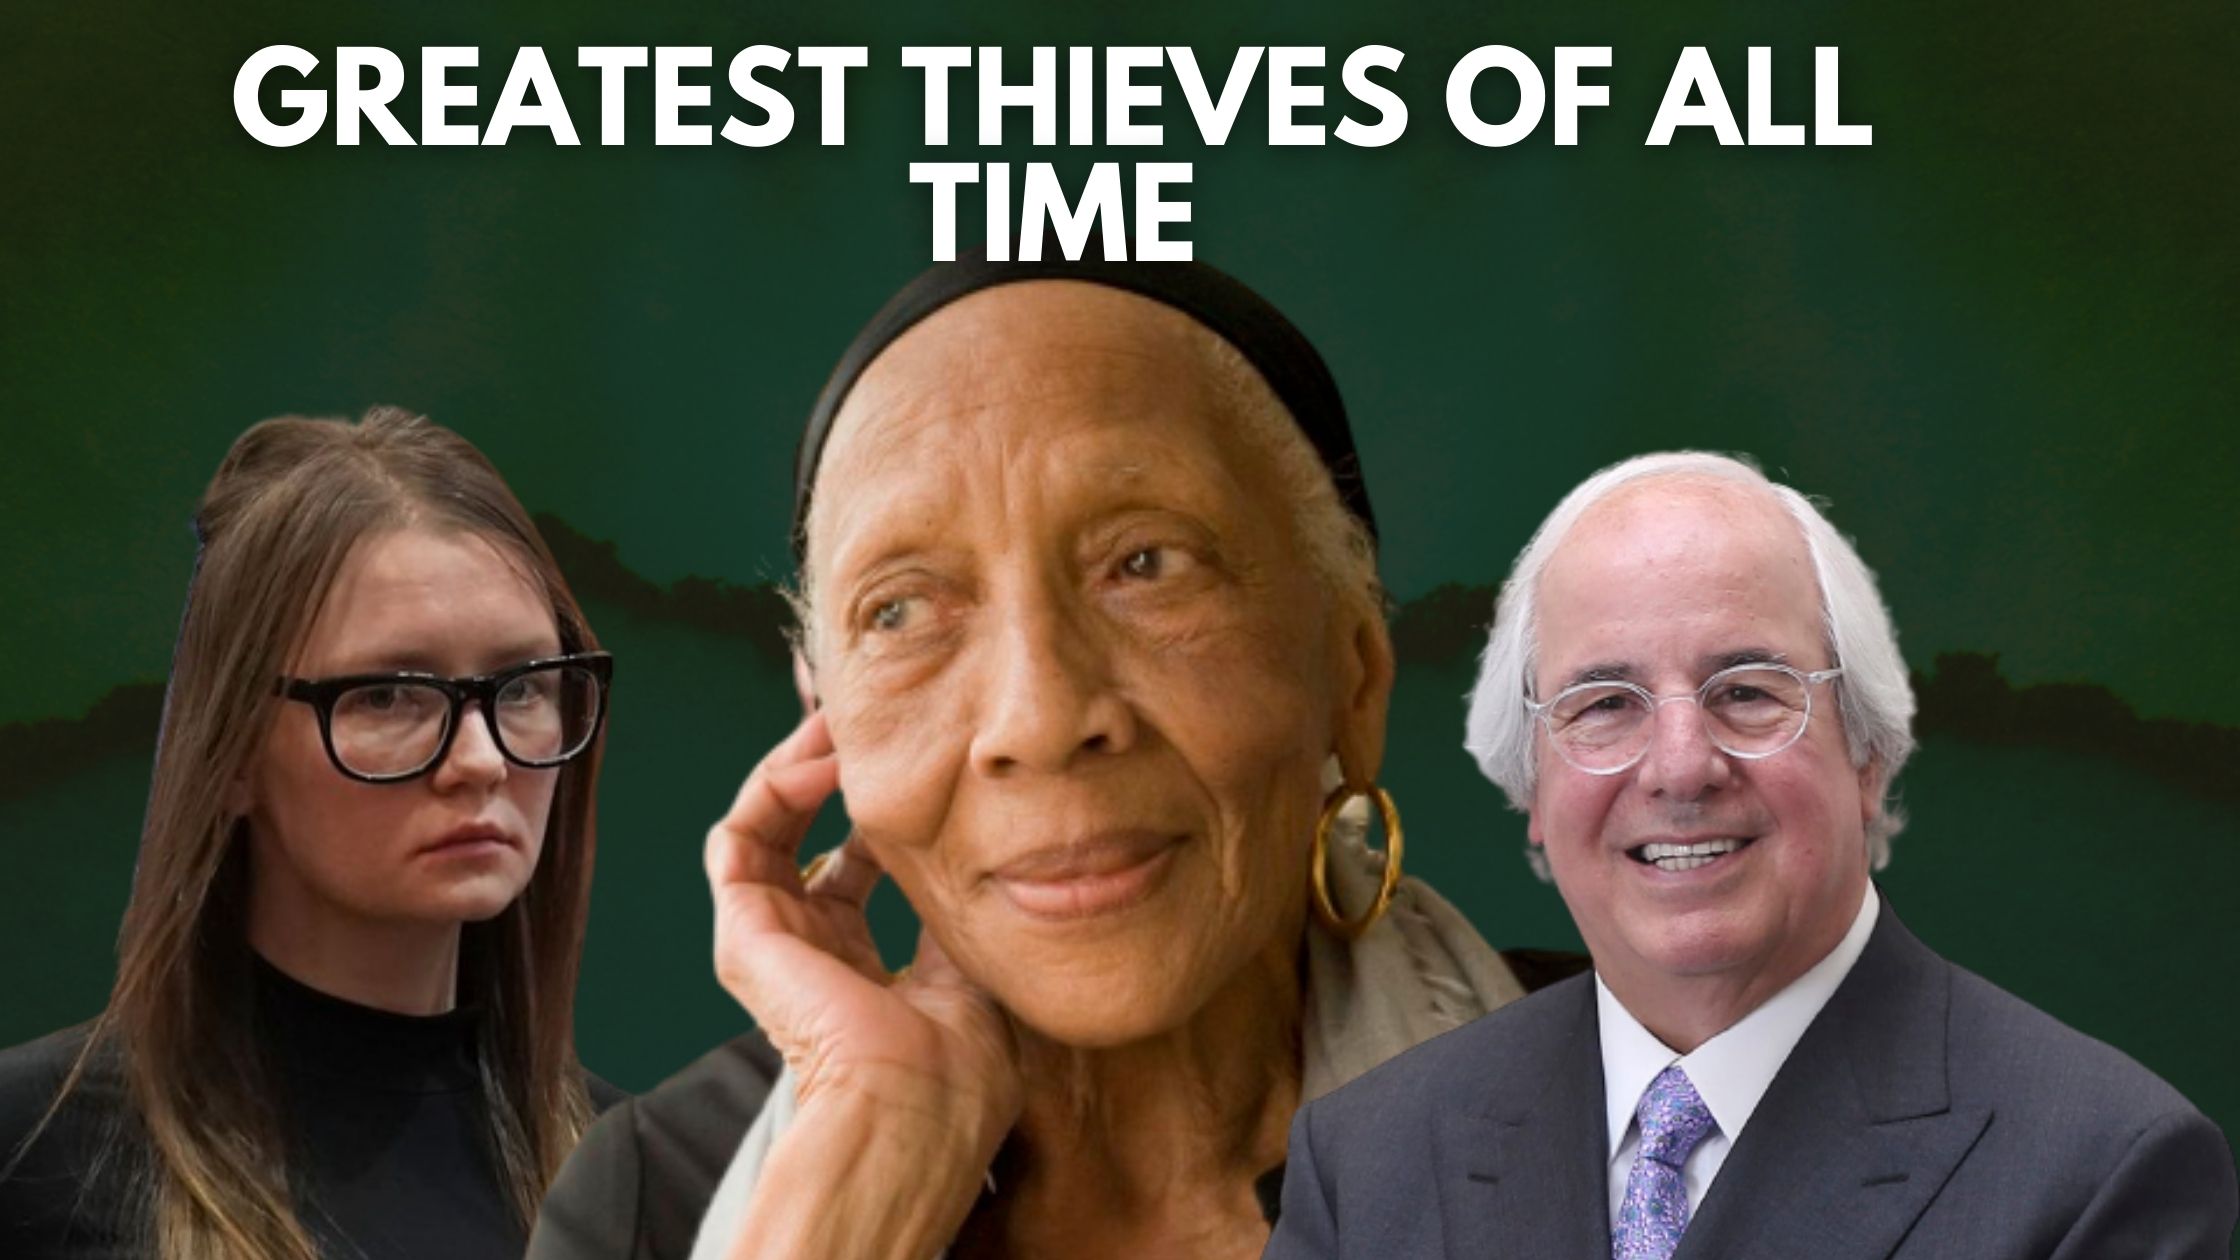 Top 10 Greatest Thieves of All Time (2022)